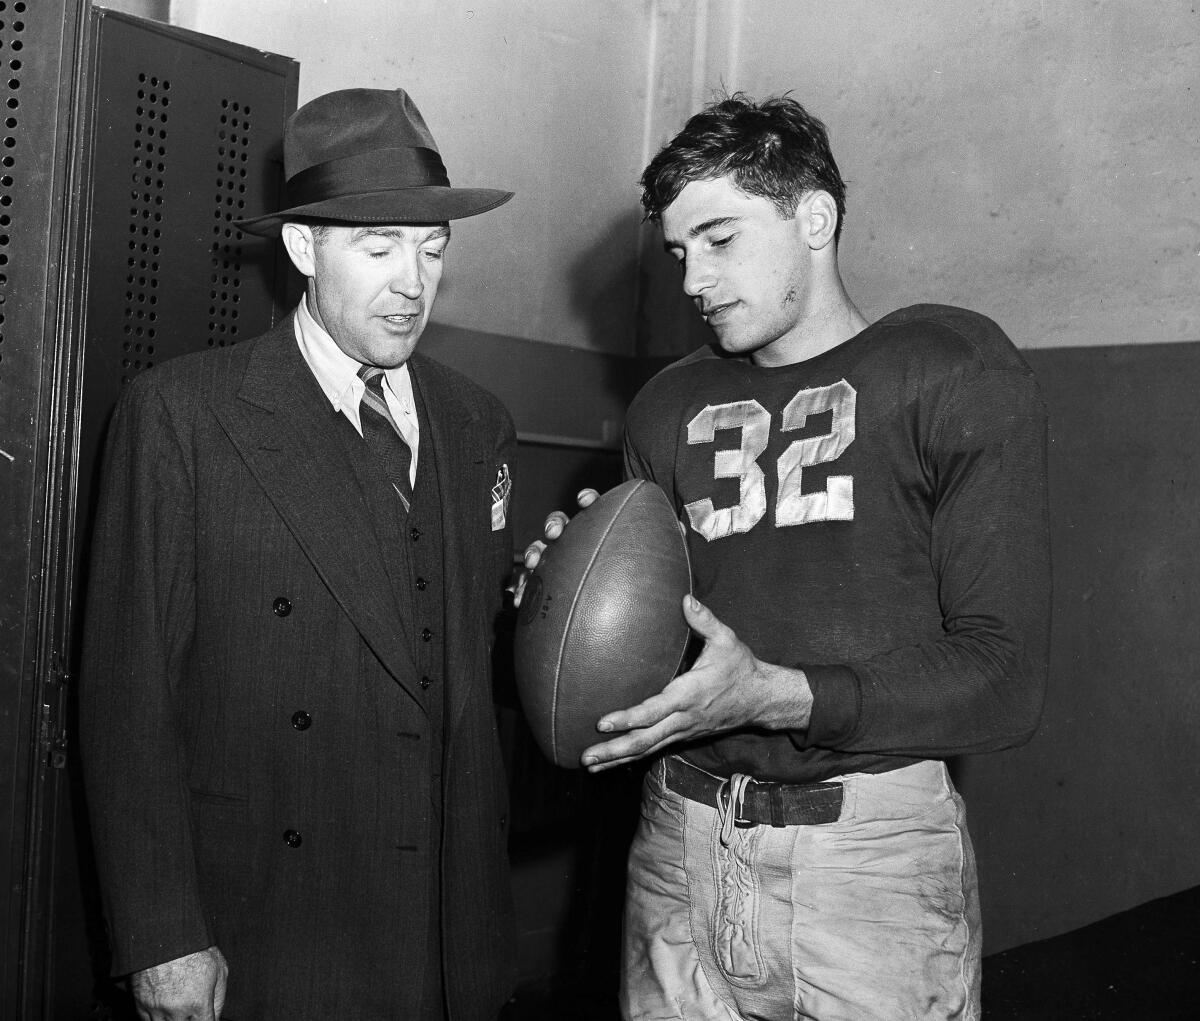 Notre Dame football coach Frank Leahy and Johnny Lujack are shown in the locker room.